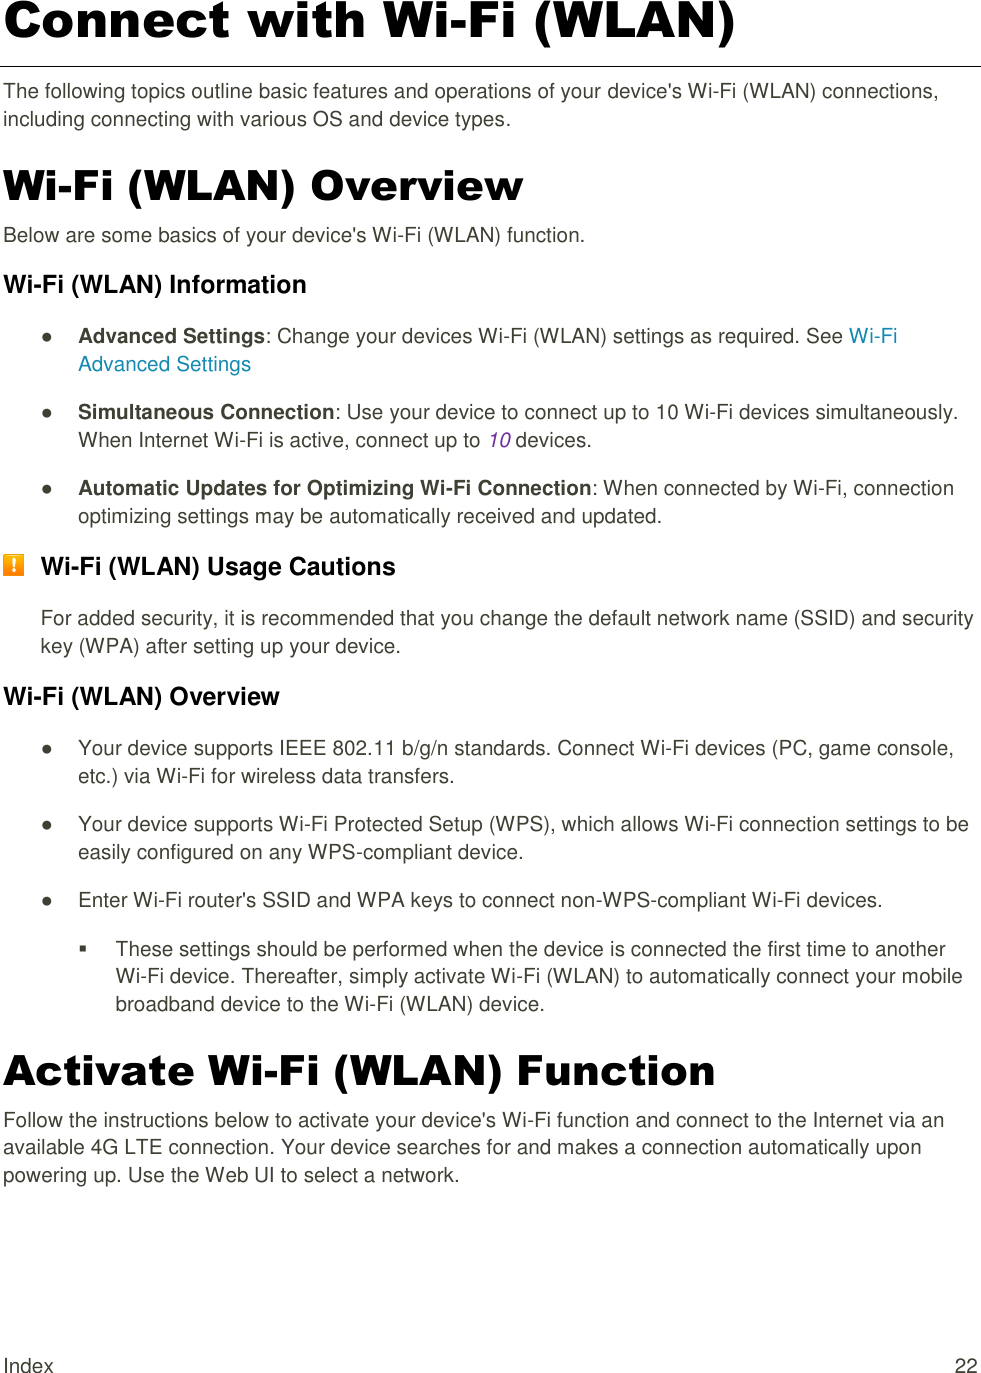 Index  22 Connect with Wi-Fi (WLAN) The following topics outline basic features and operations of your device&apos;s Wi-Fi (WLAN) connections, including connecting with various OS and device types. Wi-Fi (WLAN) Overview Below are some basics of your device&apos;s Wi-Fi (WLAN) function. Wi-Fi (WLAN) Information ● Advanced Settings: Change your devices Wi-Fi (WLAN) settings as required. See Wi-Fi Advanced Settings ● Simultaneous Connection: Use your device to connect up to 10 Wi-Fi devices simultaneously. When Internet Wi-Fi is active, connect up to 10 devices. ● Automatic Updates for Optimizing Wi-Fi Connection: When connected by Wi-Fi, connection optimizing settings may be automatically received and updated.  Wi-Fi (WLAN) Usage Cautions For added security, it is recommended that you change the default network name (SSID) and security key (WPA) after setting up your device. Wi-Fi (WLAN) Overview  ●  Your device supports IEEE 802.11 b/g/n standards. Connect Wi-Fi devices (PC, game console, etc.) via Wi-Fi for wireless data transfers. ●  Your device supports Wi-Fi Protected Setup (WPS), which allows Wi-Fi connection settings to be easily configured on any WPS-compliant device. ●  Enter Wi-Fi router&apos;s SSID and WPA keys to connect non-WPS-compliant Wi-Fi devices.   These settings should be performed when the device is connected the first time to another Wi-Fi device. Thereafter, simply activate Wi-Fi (WLAN) to automatically connect your mobile broadband device to the Wi-Fi (WLAN) device.  Activate Wi-Fi (WLAN) Function Follow the instructions below to activate your device&apos;s Wi-Fi function and connect to the Internet via an available 4G LTE connection. Your device searches for and makes a connection automatically upon powering up. Use the Web UI to select a network. 